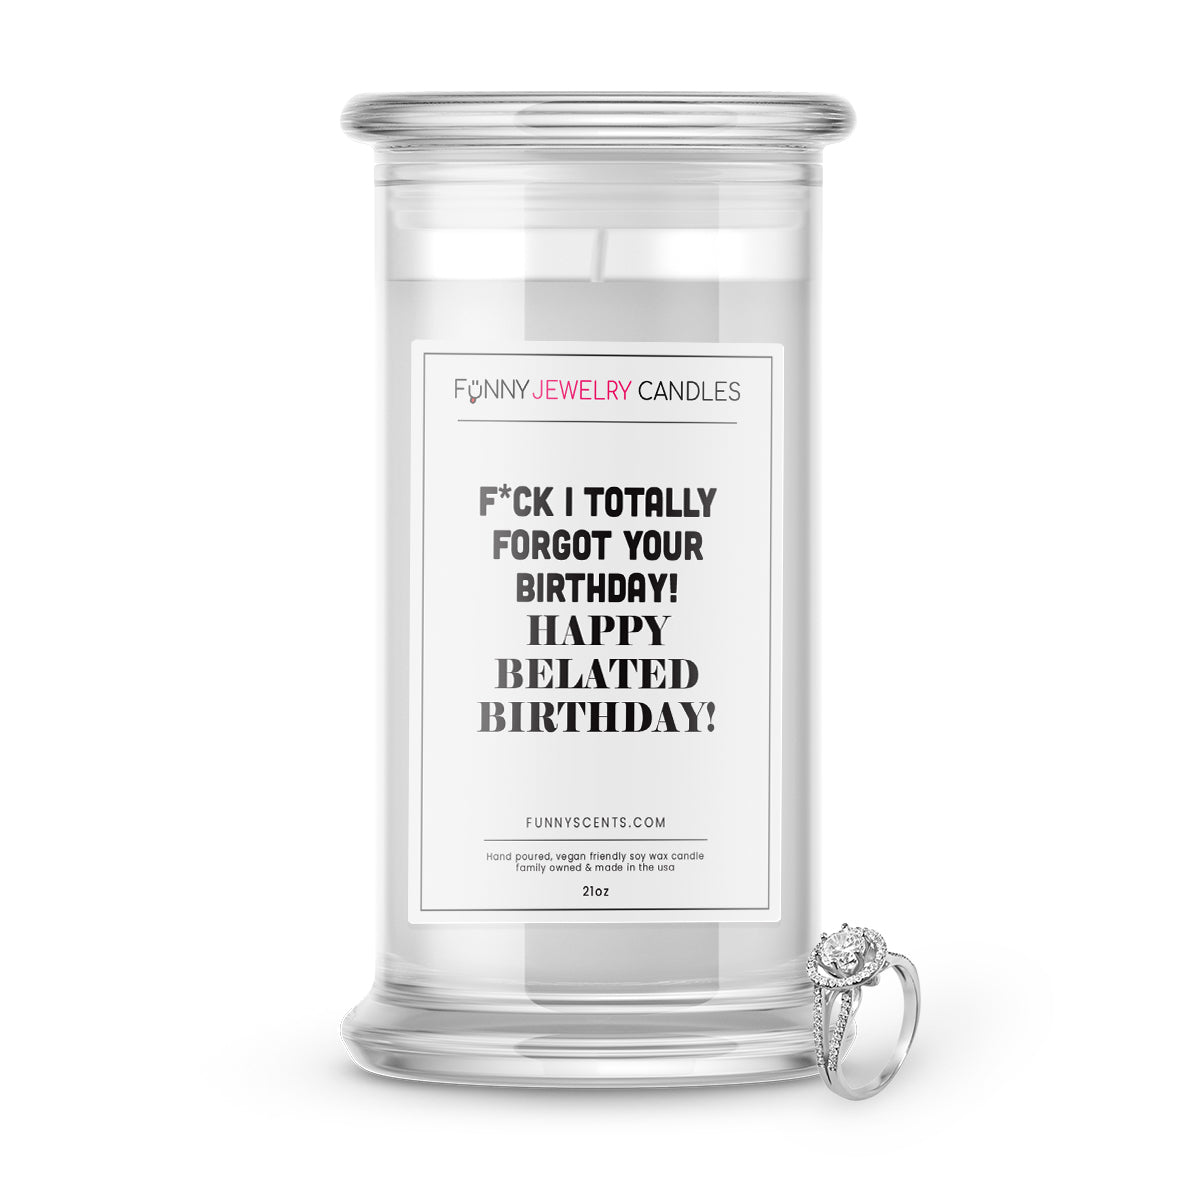 F*ck I Totally Forgot Your Birthday! Happy Belated Birthday! Jewelry Funny Candles